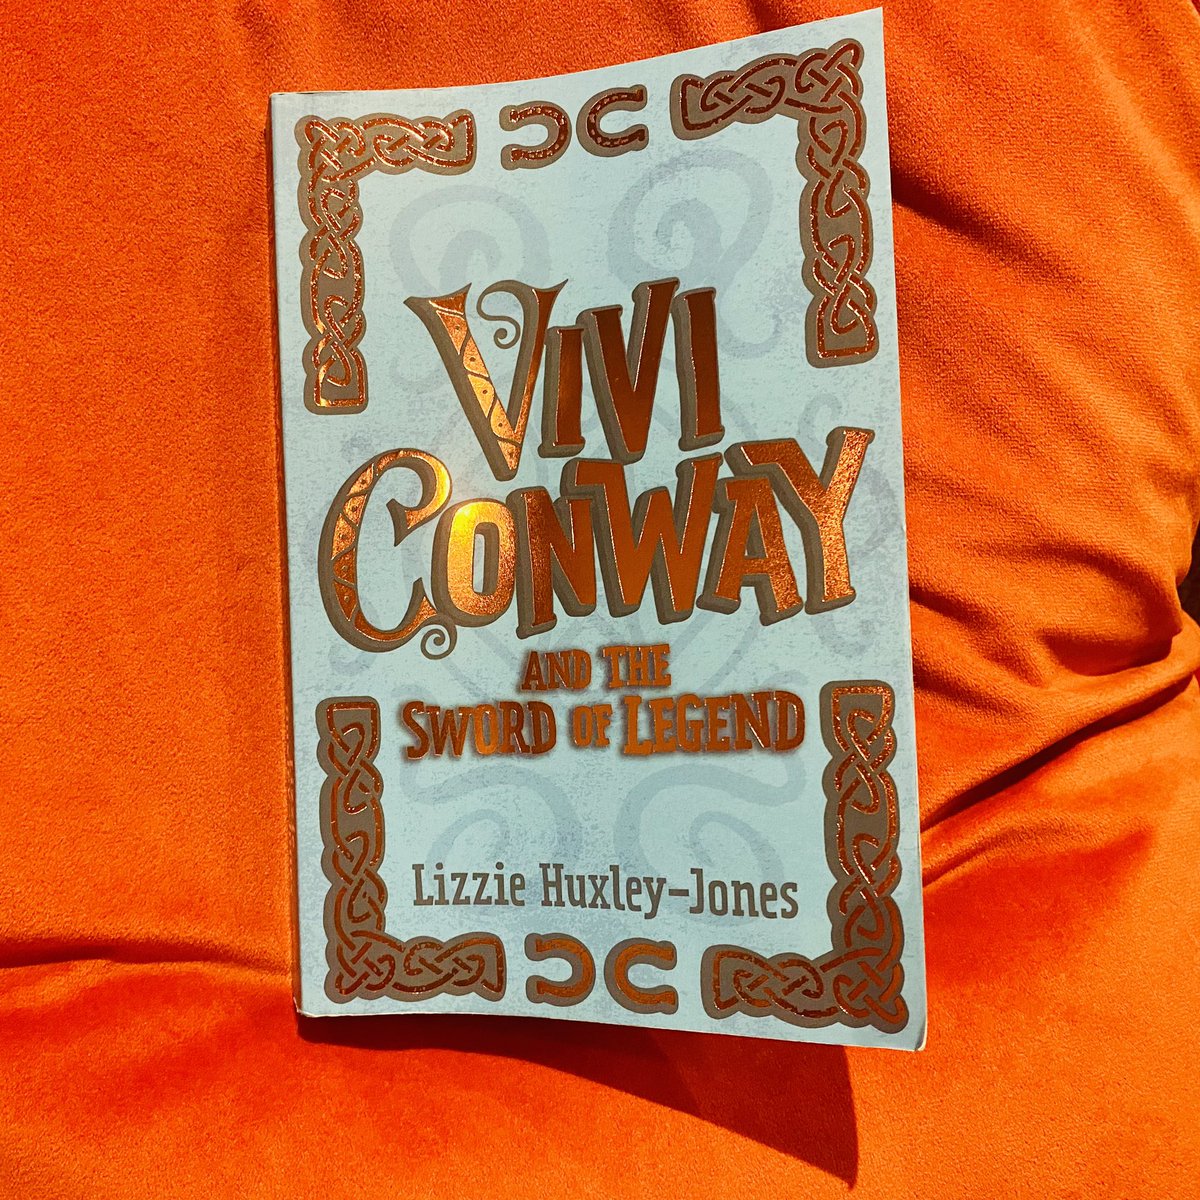 37) Vivi Conway And The Sword Of Legend
Magical, inclusive, fantasy adventure, steeped in Welsh mythology. If you’re waiting for this to publish on June 1st, I suggest you A) Preorder a copy & B) Read The Mab to brush up on your Welsh folklore 🏴󠁧󠁢󠁷󠁬󠁳󠁿 
#BookTwitter #ViviConway #Wales